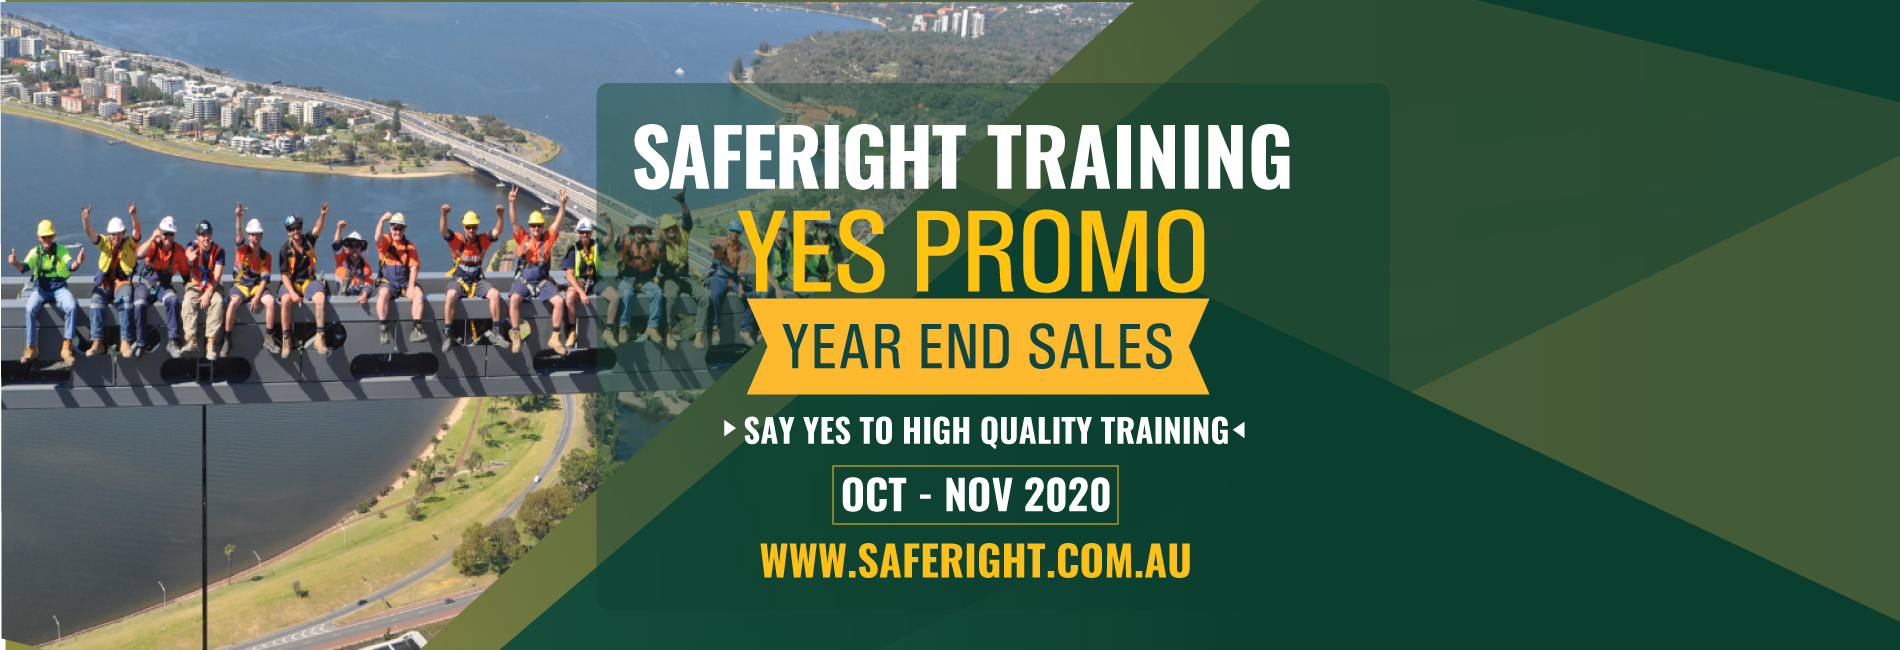 saferight year end sale